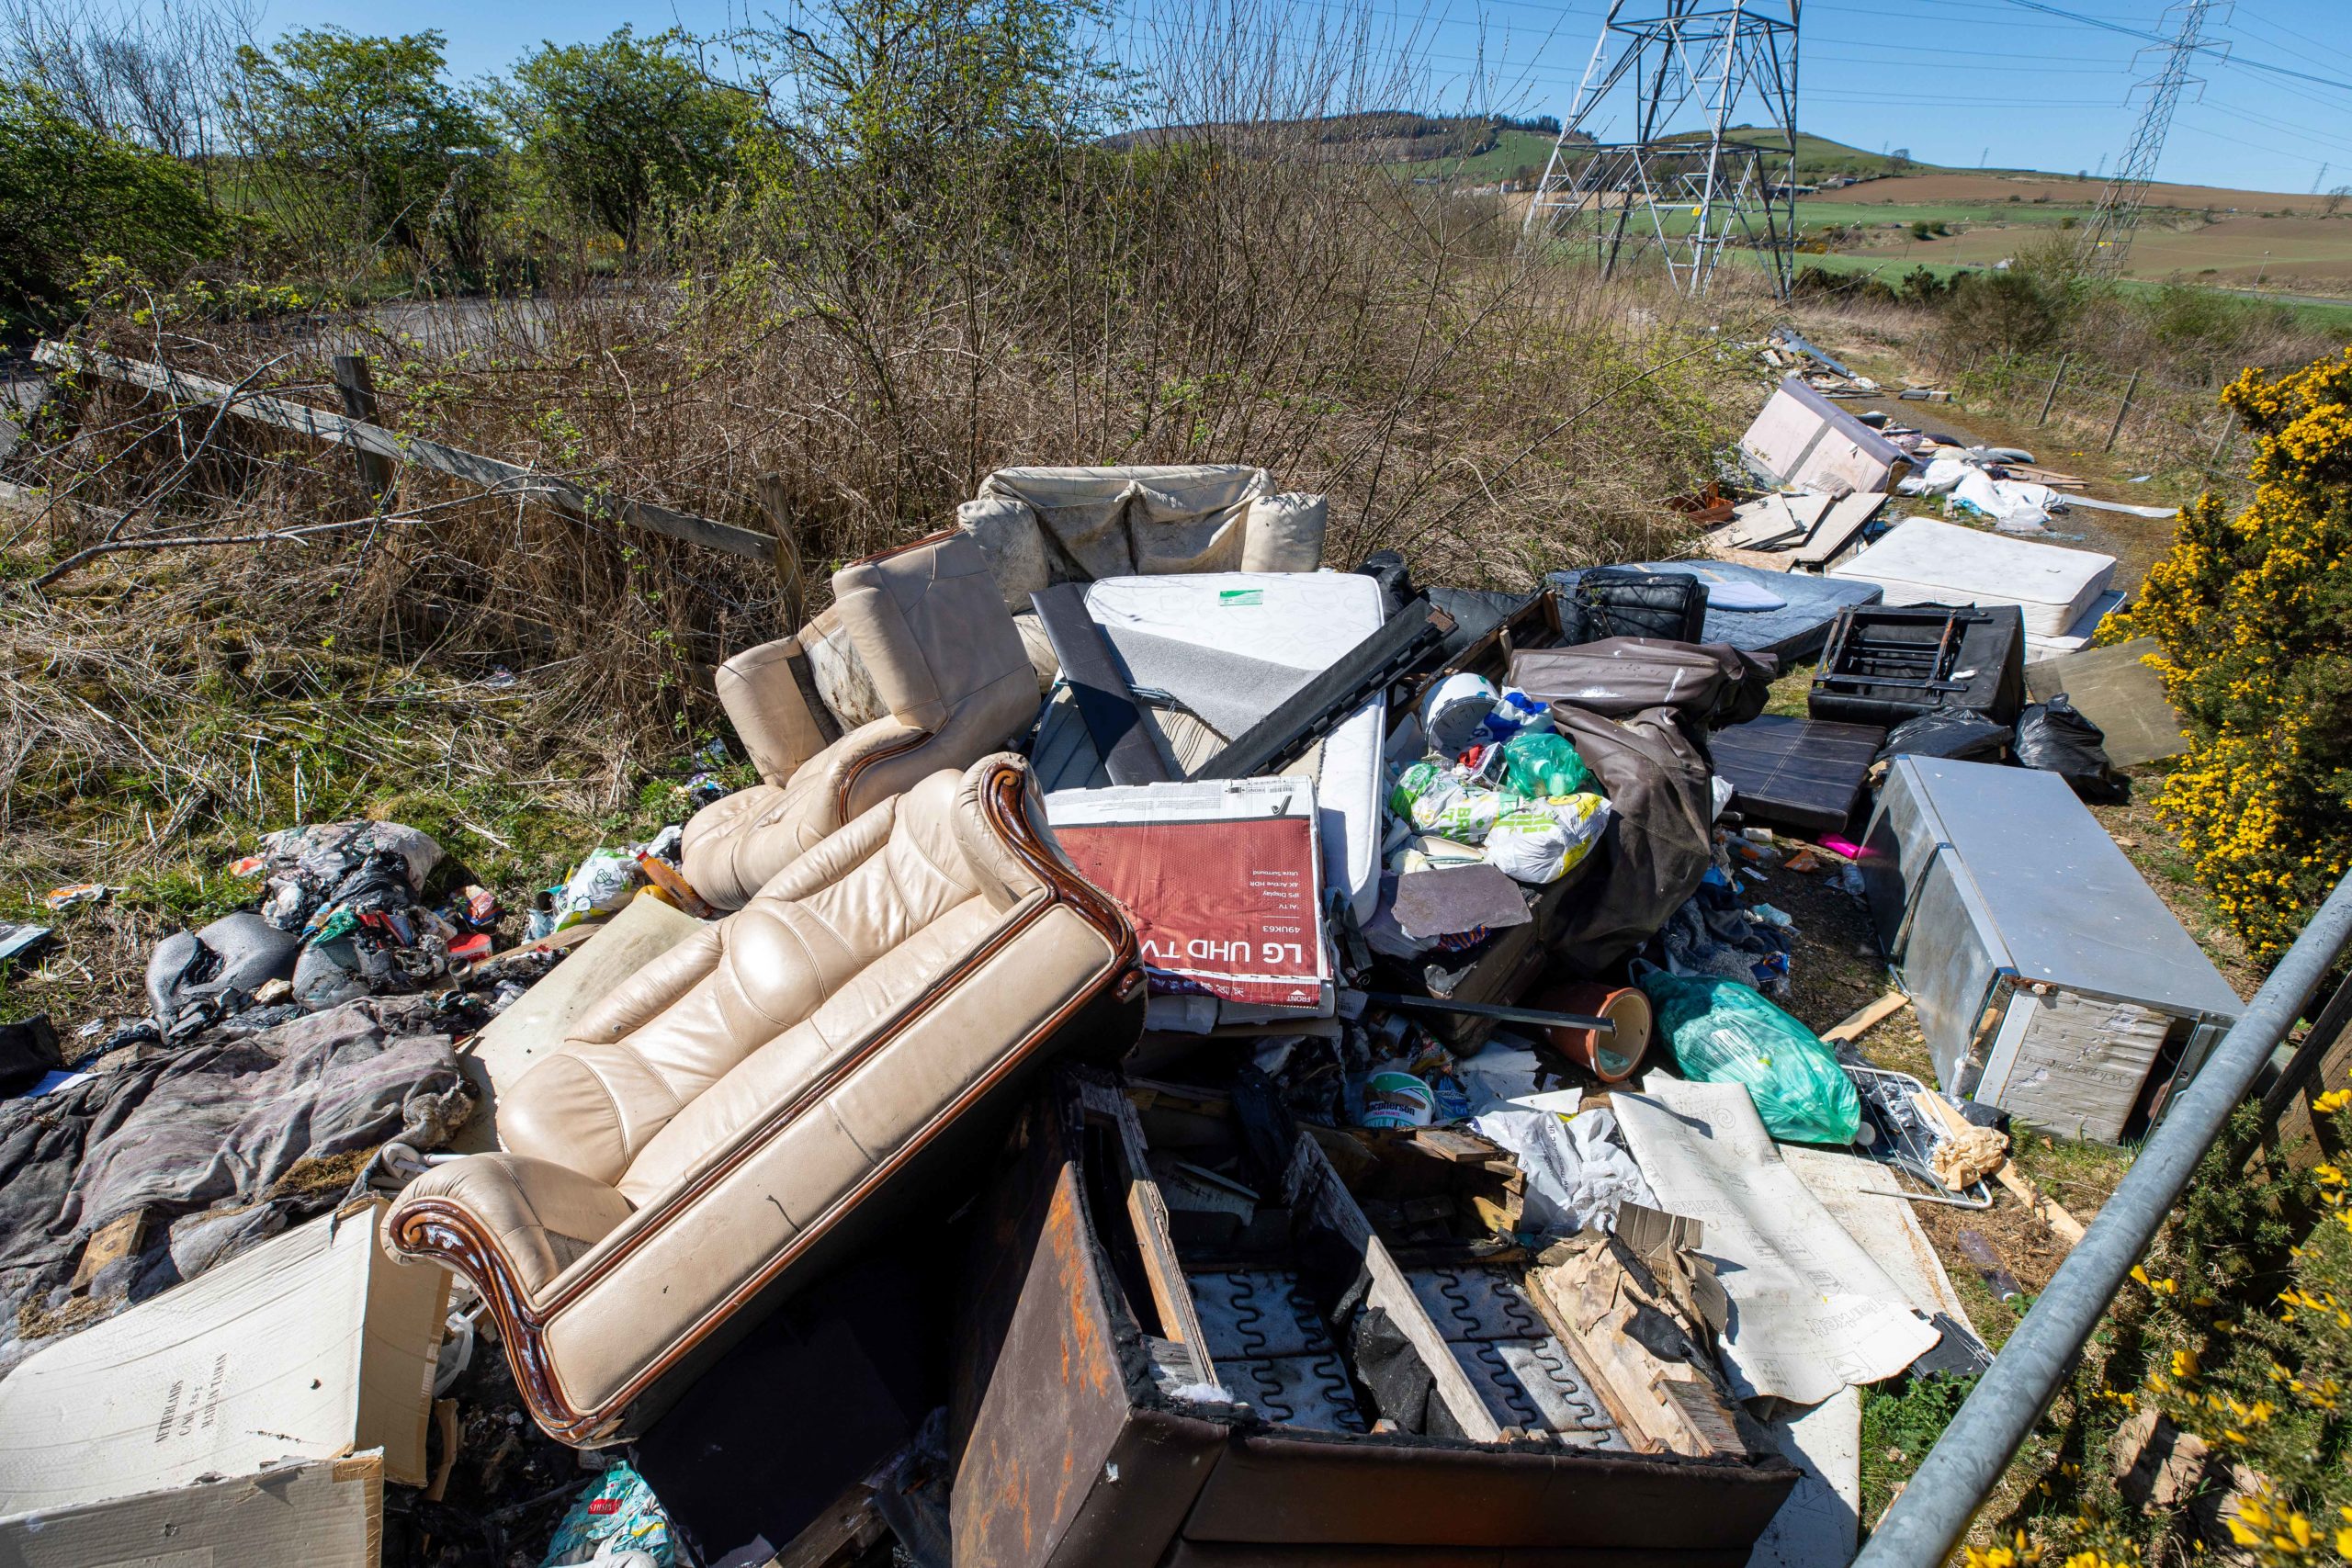 Fly-tipping is a big problem in Tayside and across Scotland.